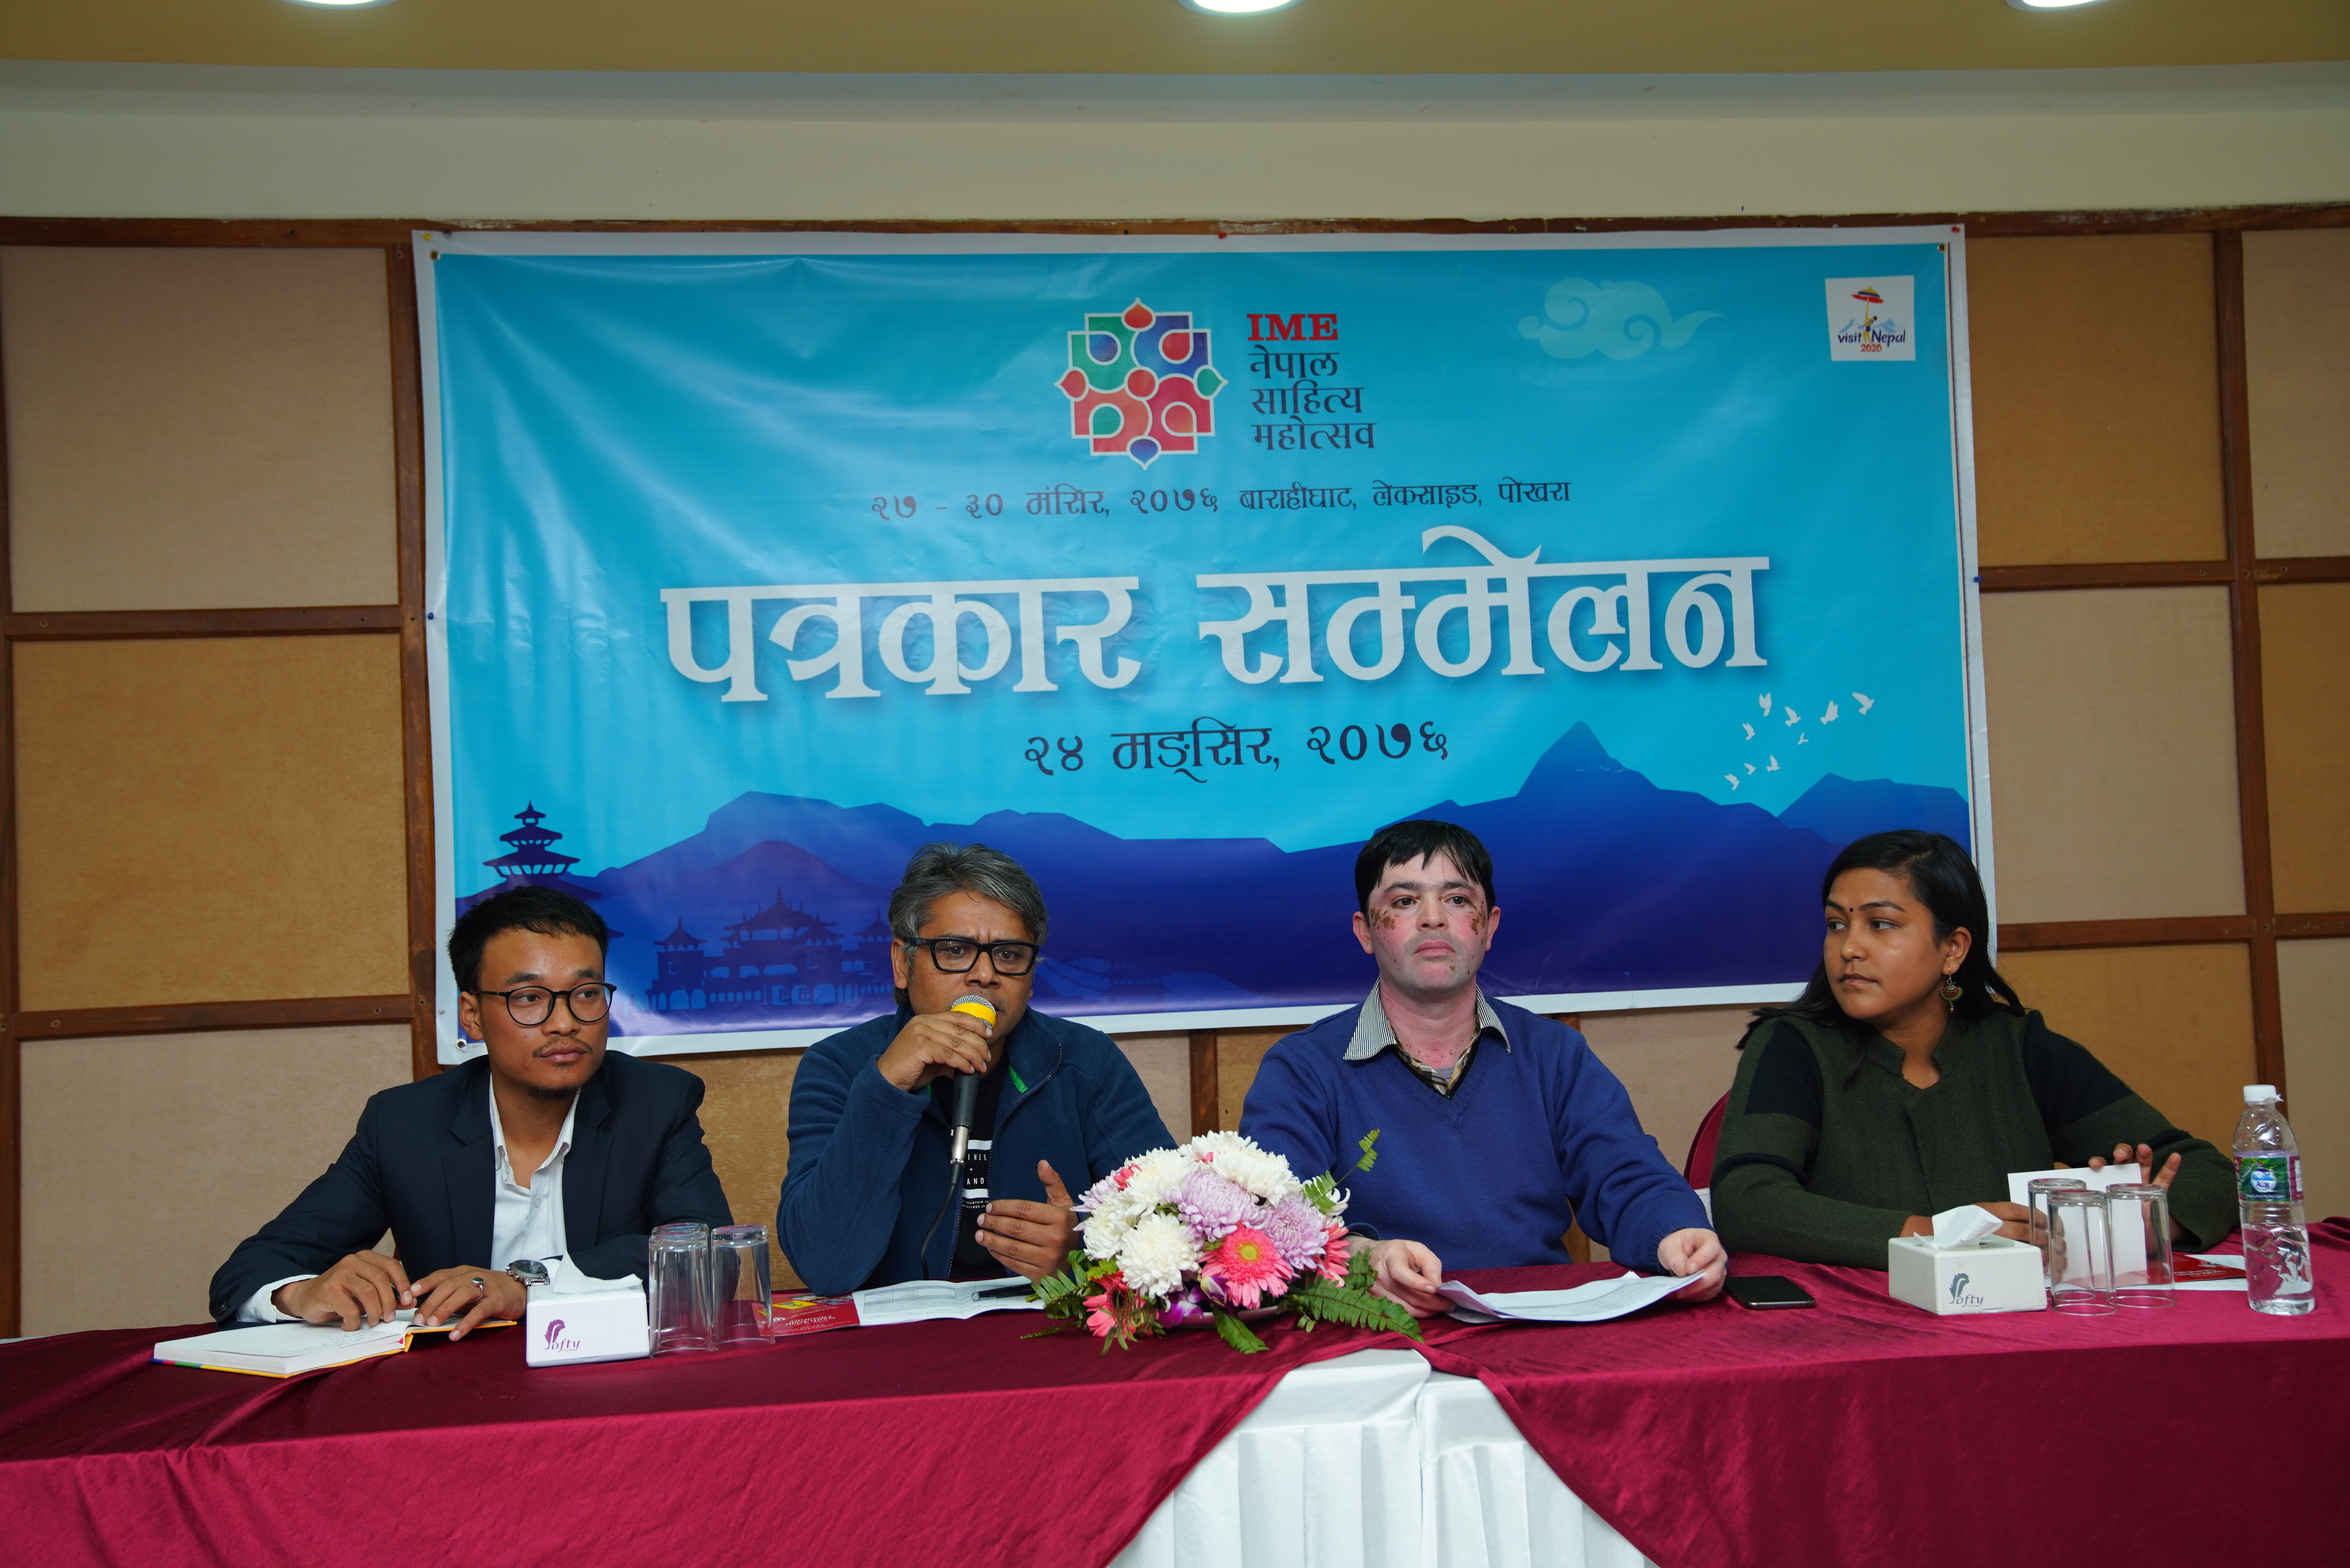 Eighth edition of IME Nepal Literature Festival in Pokhara